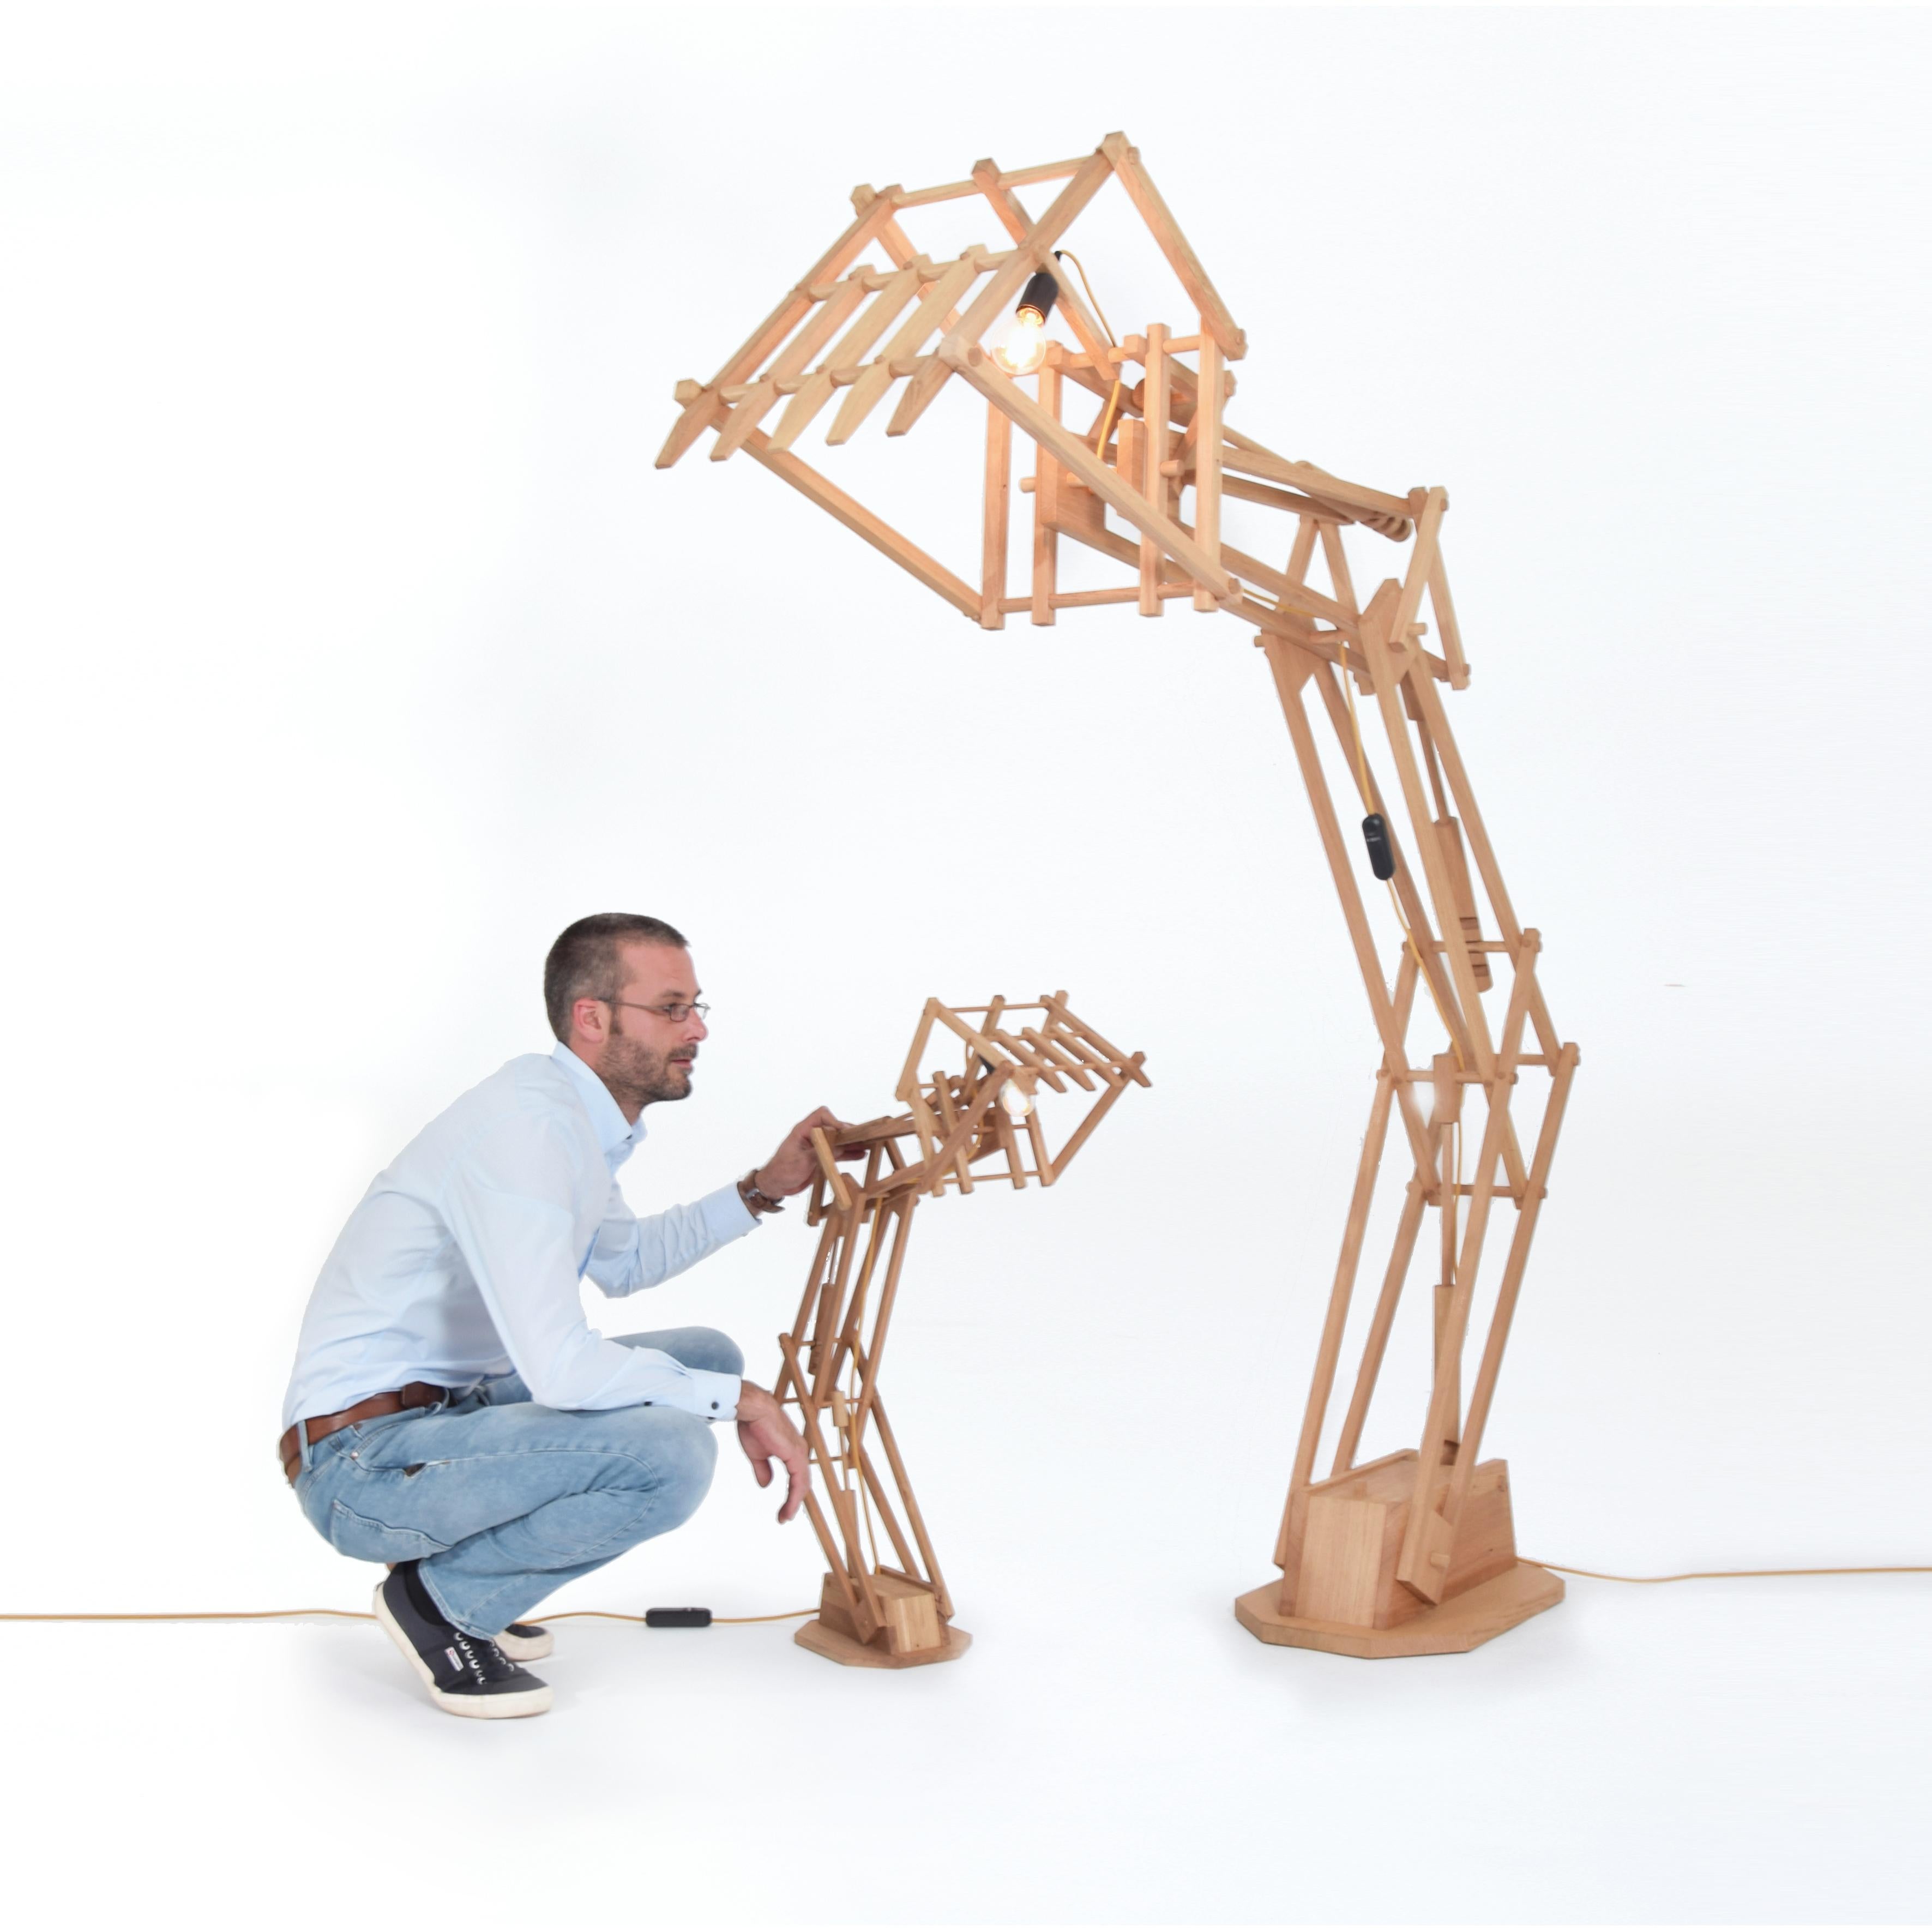 Digit lamp desk by Studio Pin
Dimensions: D 85 x W 21 x H 76 cm 
Materials: Solid oak. 
Weight: 6 kg
Content: LED dimmer, E14 fitting

Try hard, dig deep, they said. Can you dig it? This digger is a handmade light fixtures made out of reused